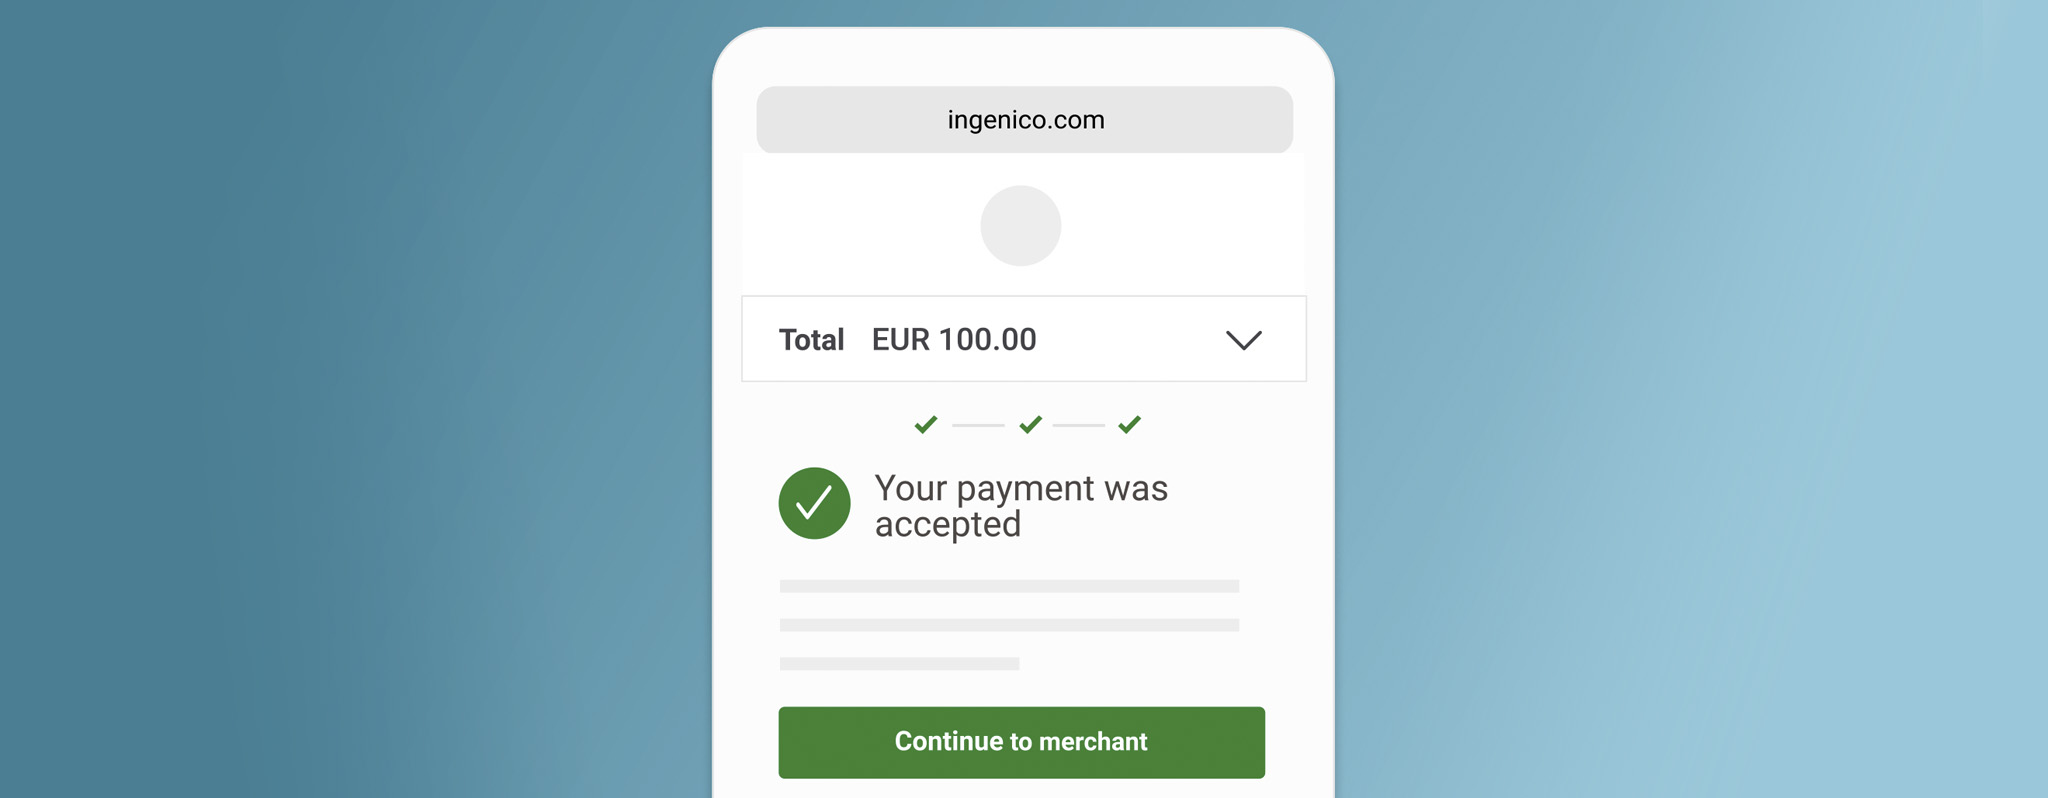 Ingenico payment page in mobile view